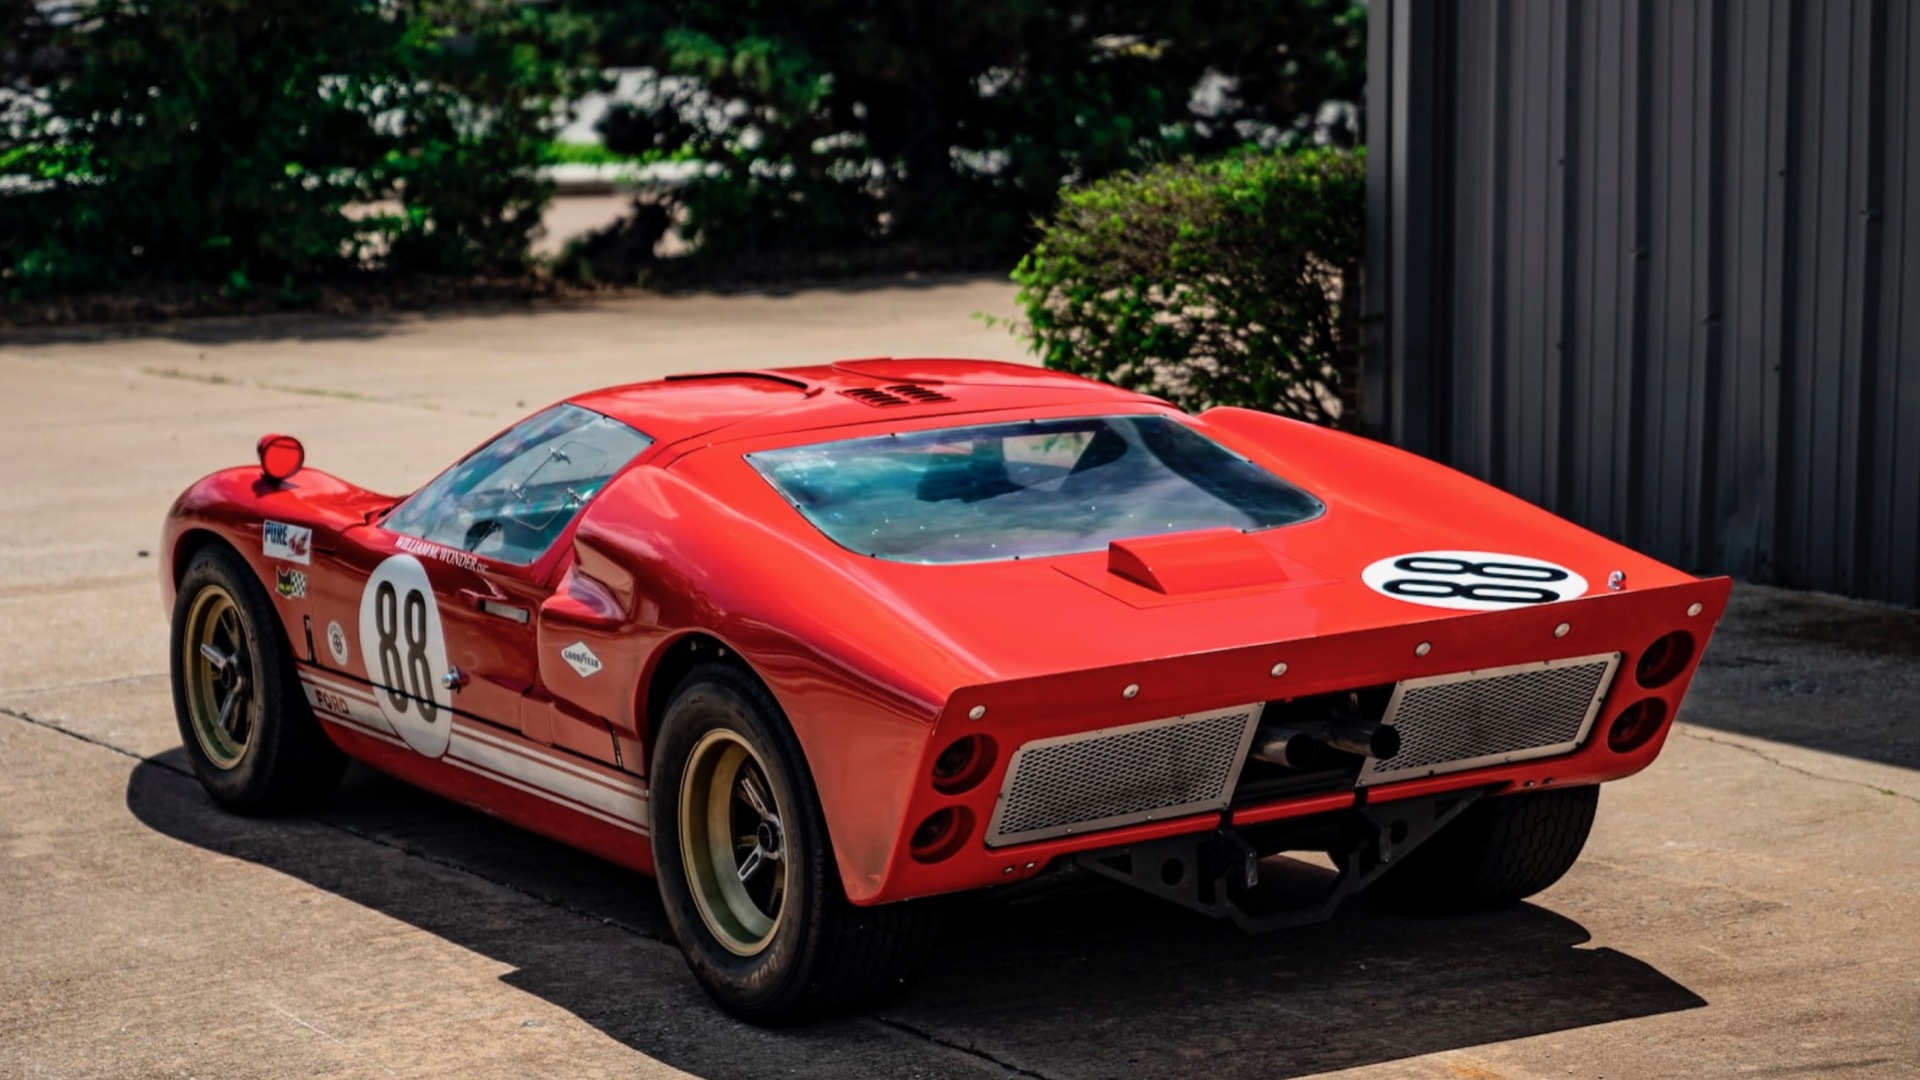 1966 Race Car Replicas Ford GT40 used in "Ford v. Ferrari" (photo via Mecum Auctions)